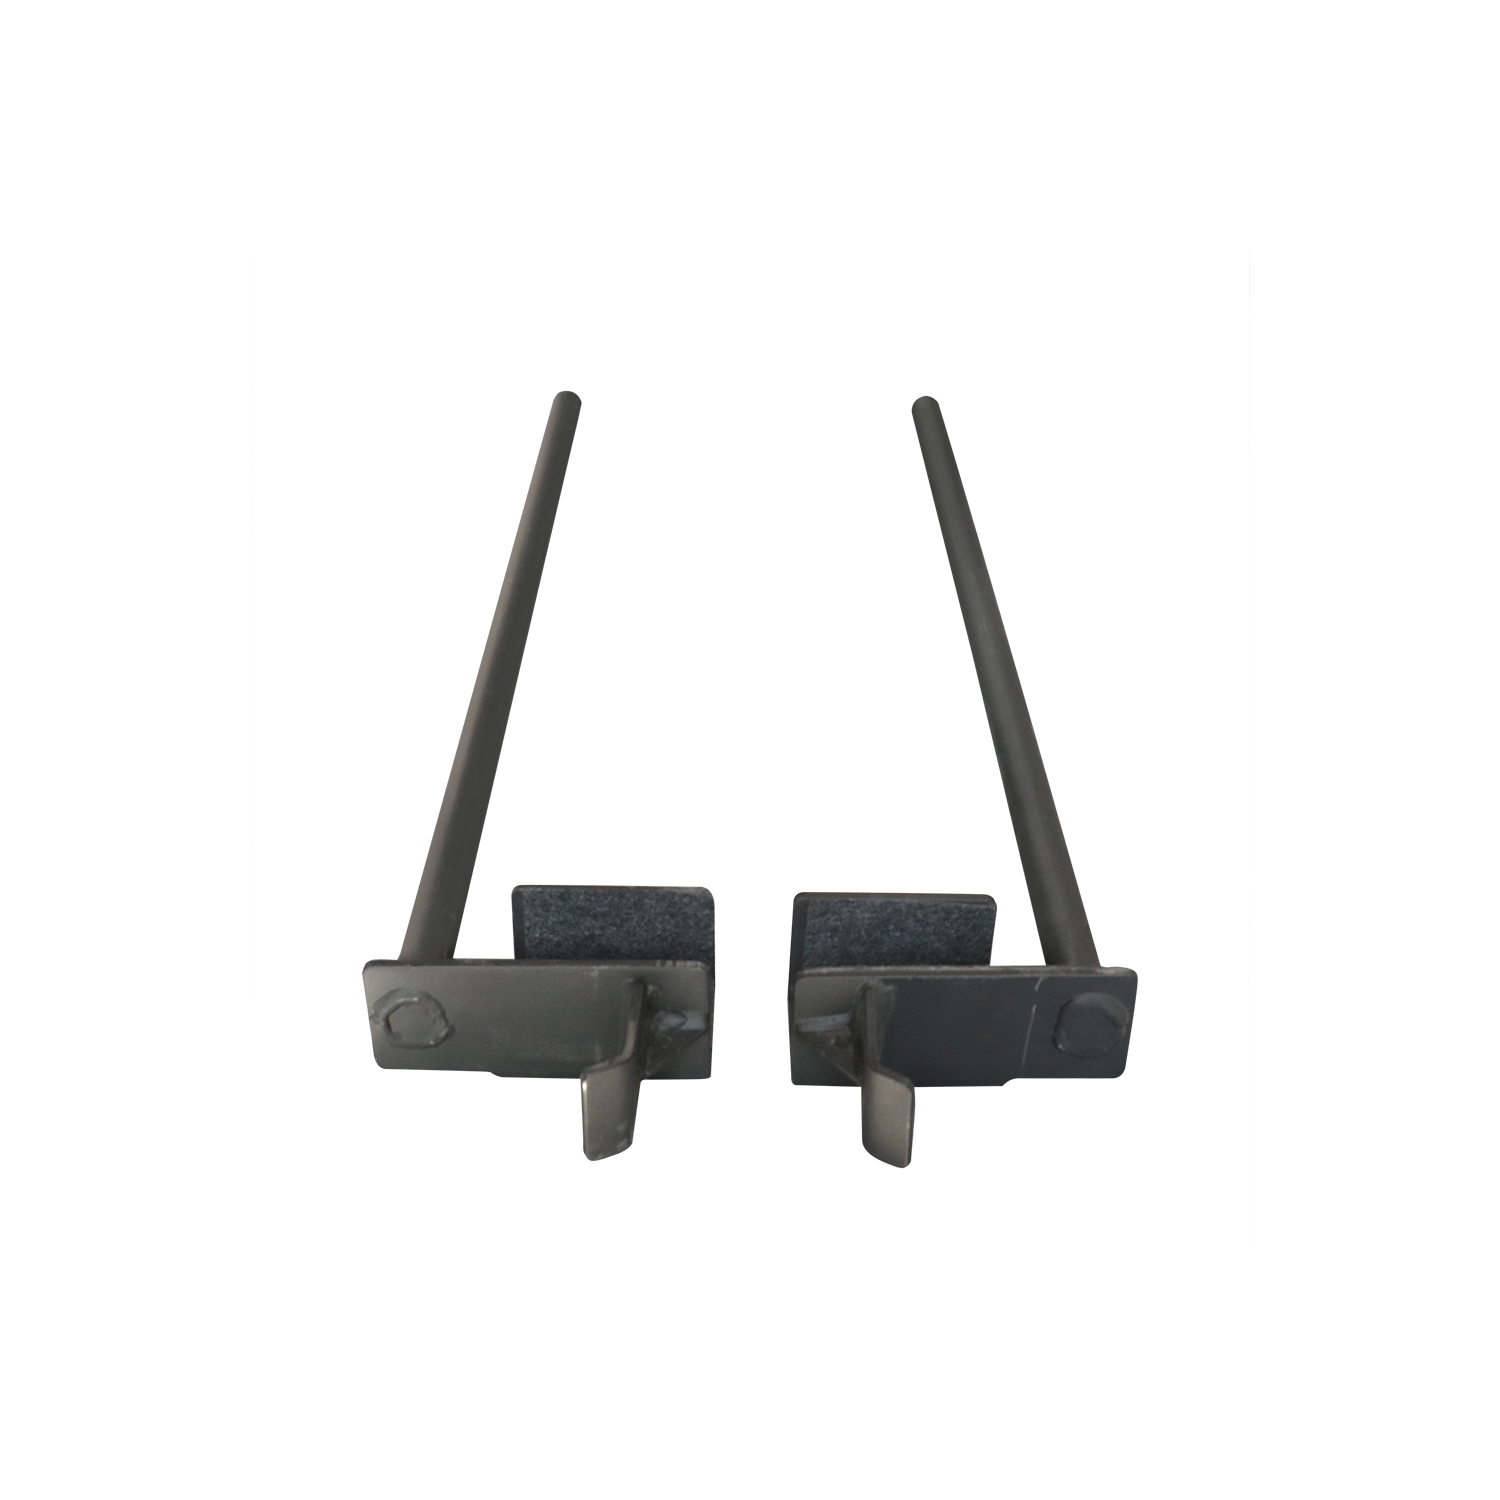 PRISP J-Hooks For Power Cage - Compatible with 2.5 x 2.5 Inch Racks, Sold  in Pairs 